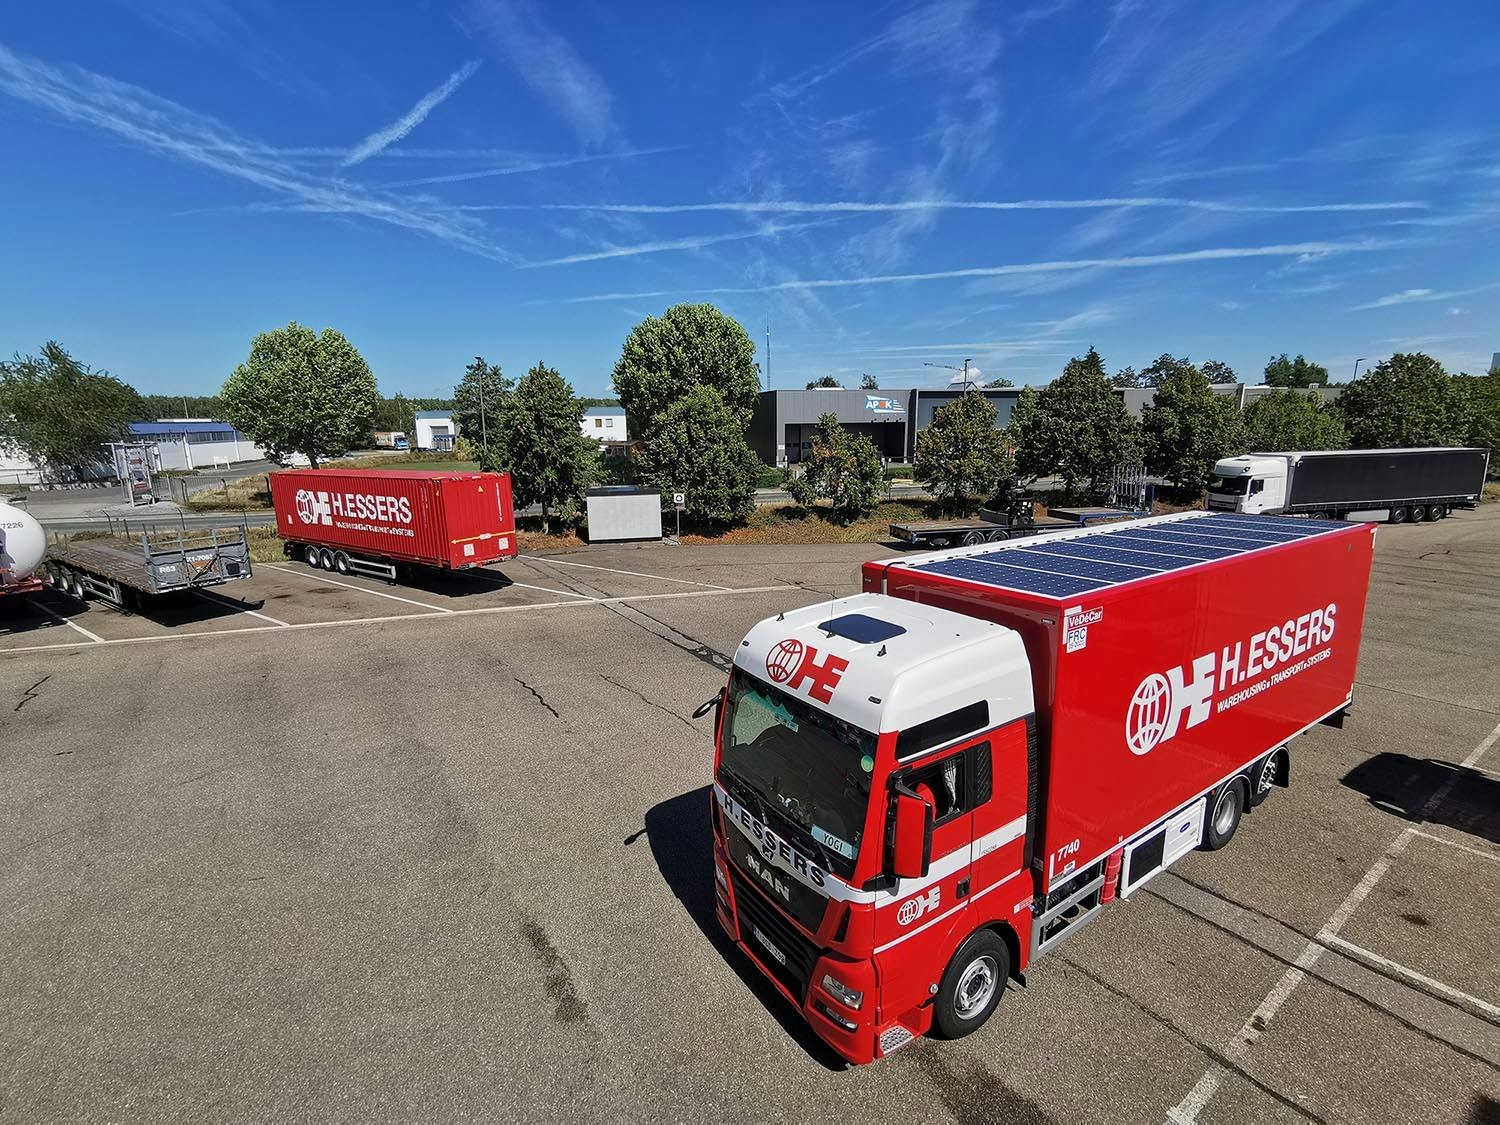 H. Essers' solar-powered truck with the SolarOnTop technology